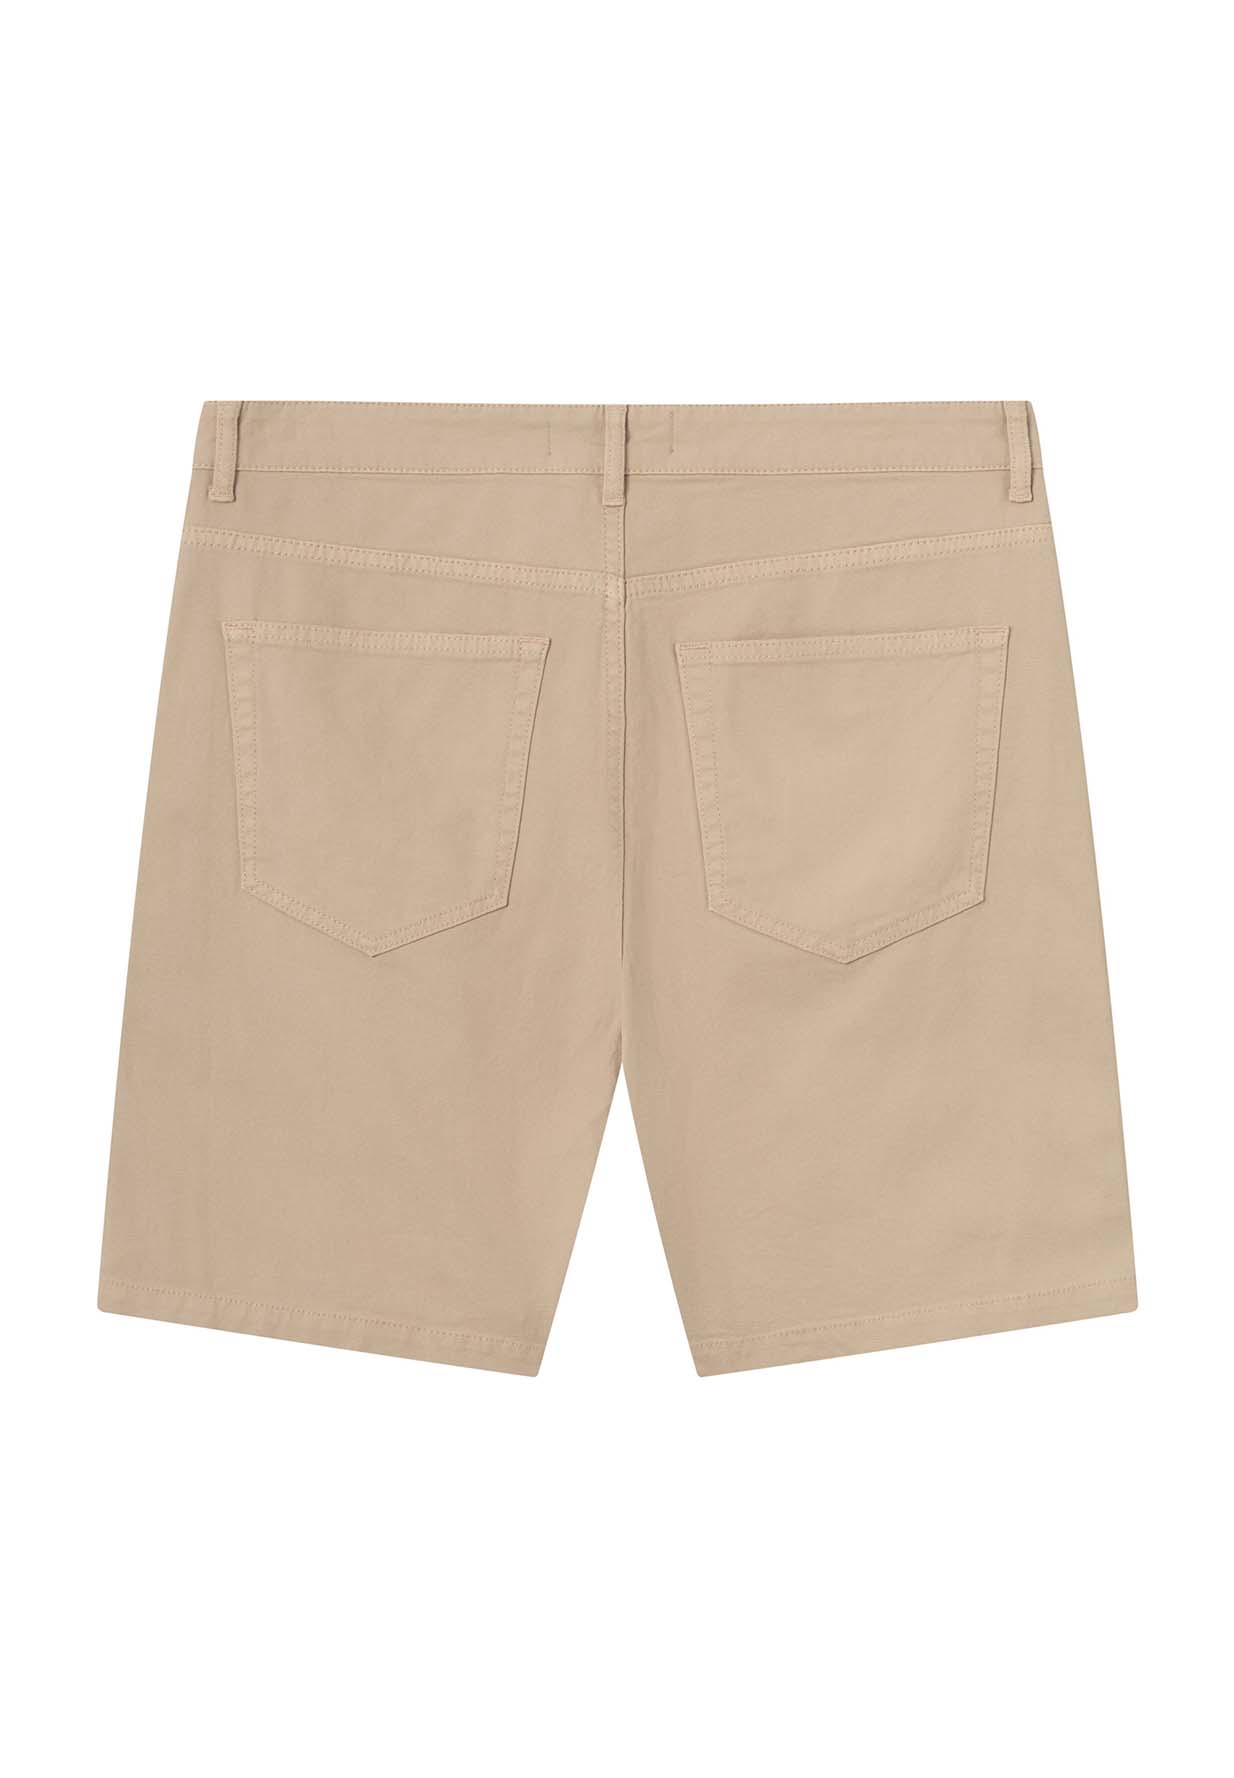 KNOWLEDGECOTTON APPAREL Loose 5-Pocket Canvas Twill Shorts light feather gray 33